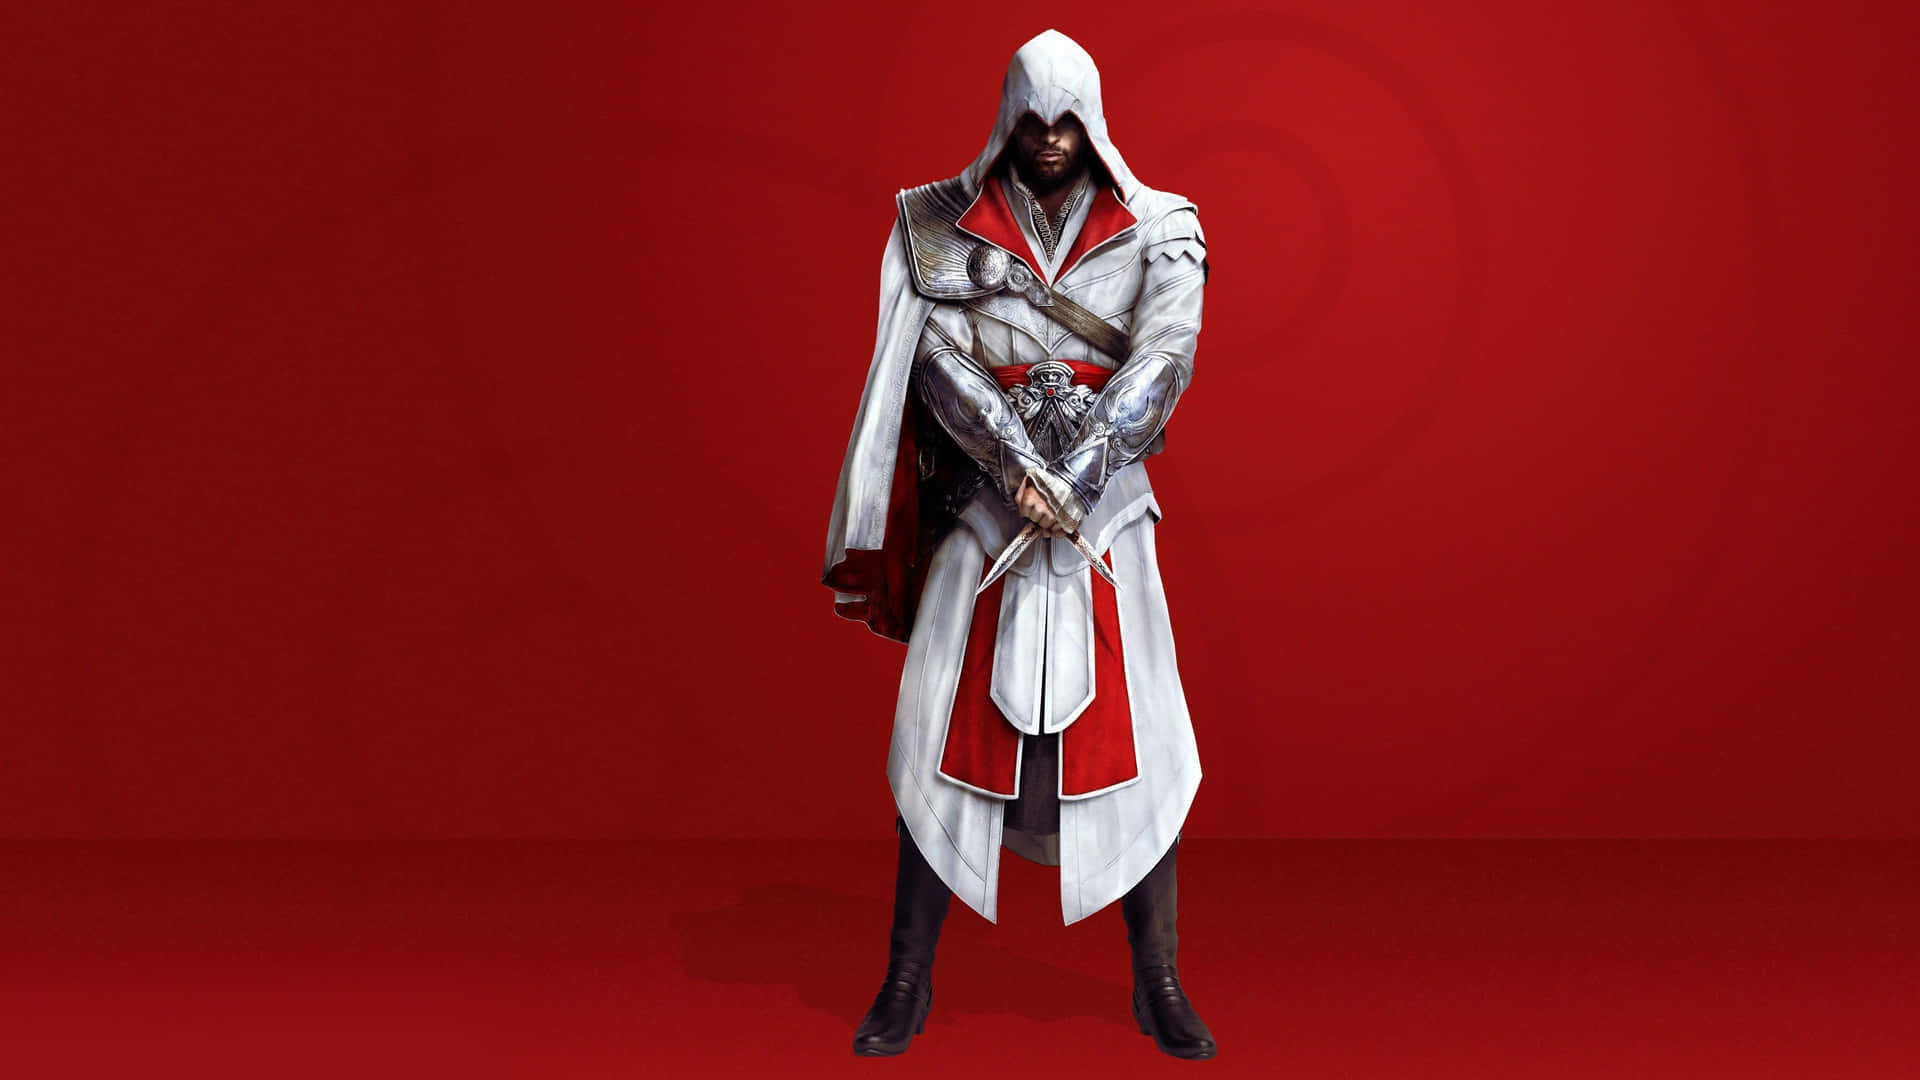 Ezio Auditore, Master Assassin of the Brotherhood, Against a Spectacular Landscape Wallpaper